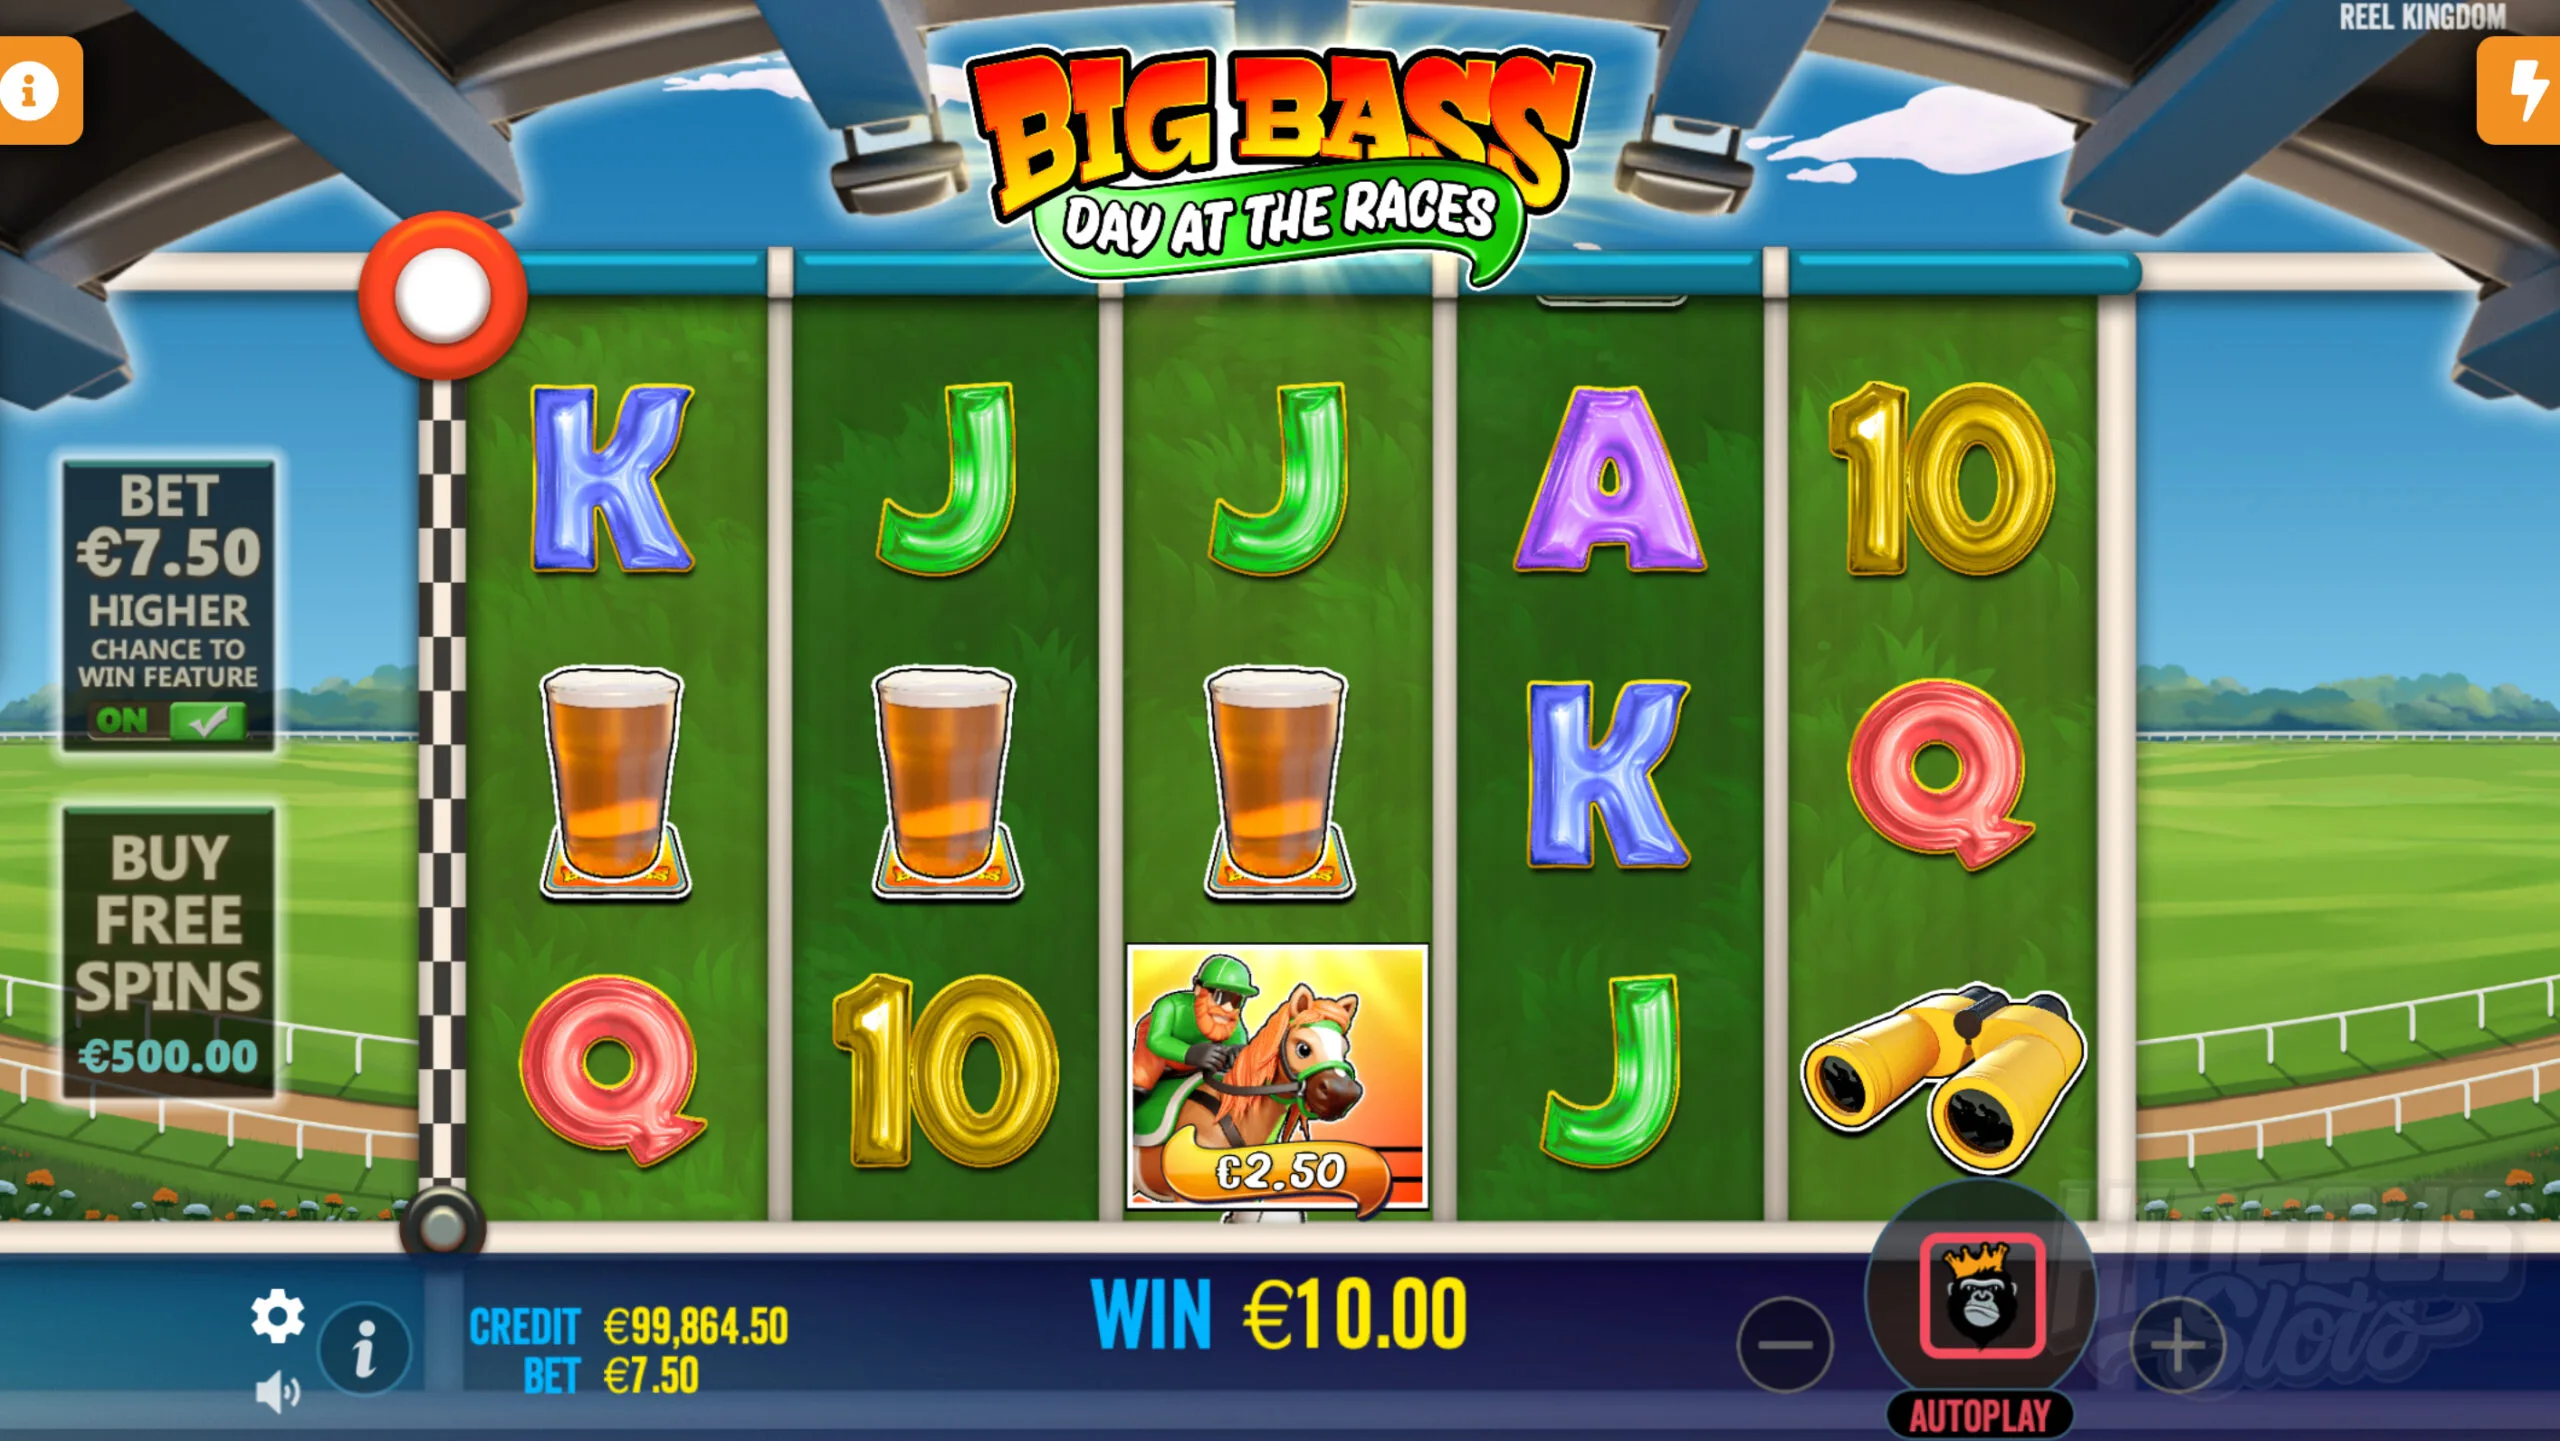 Big Bass Day at the Races Offers Players 10 Fixed Win Lines